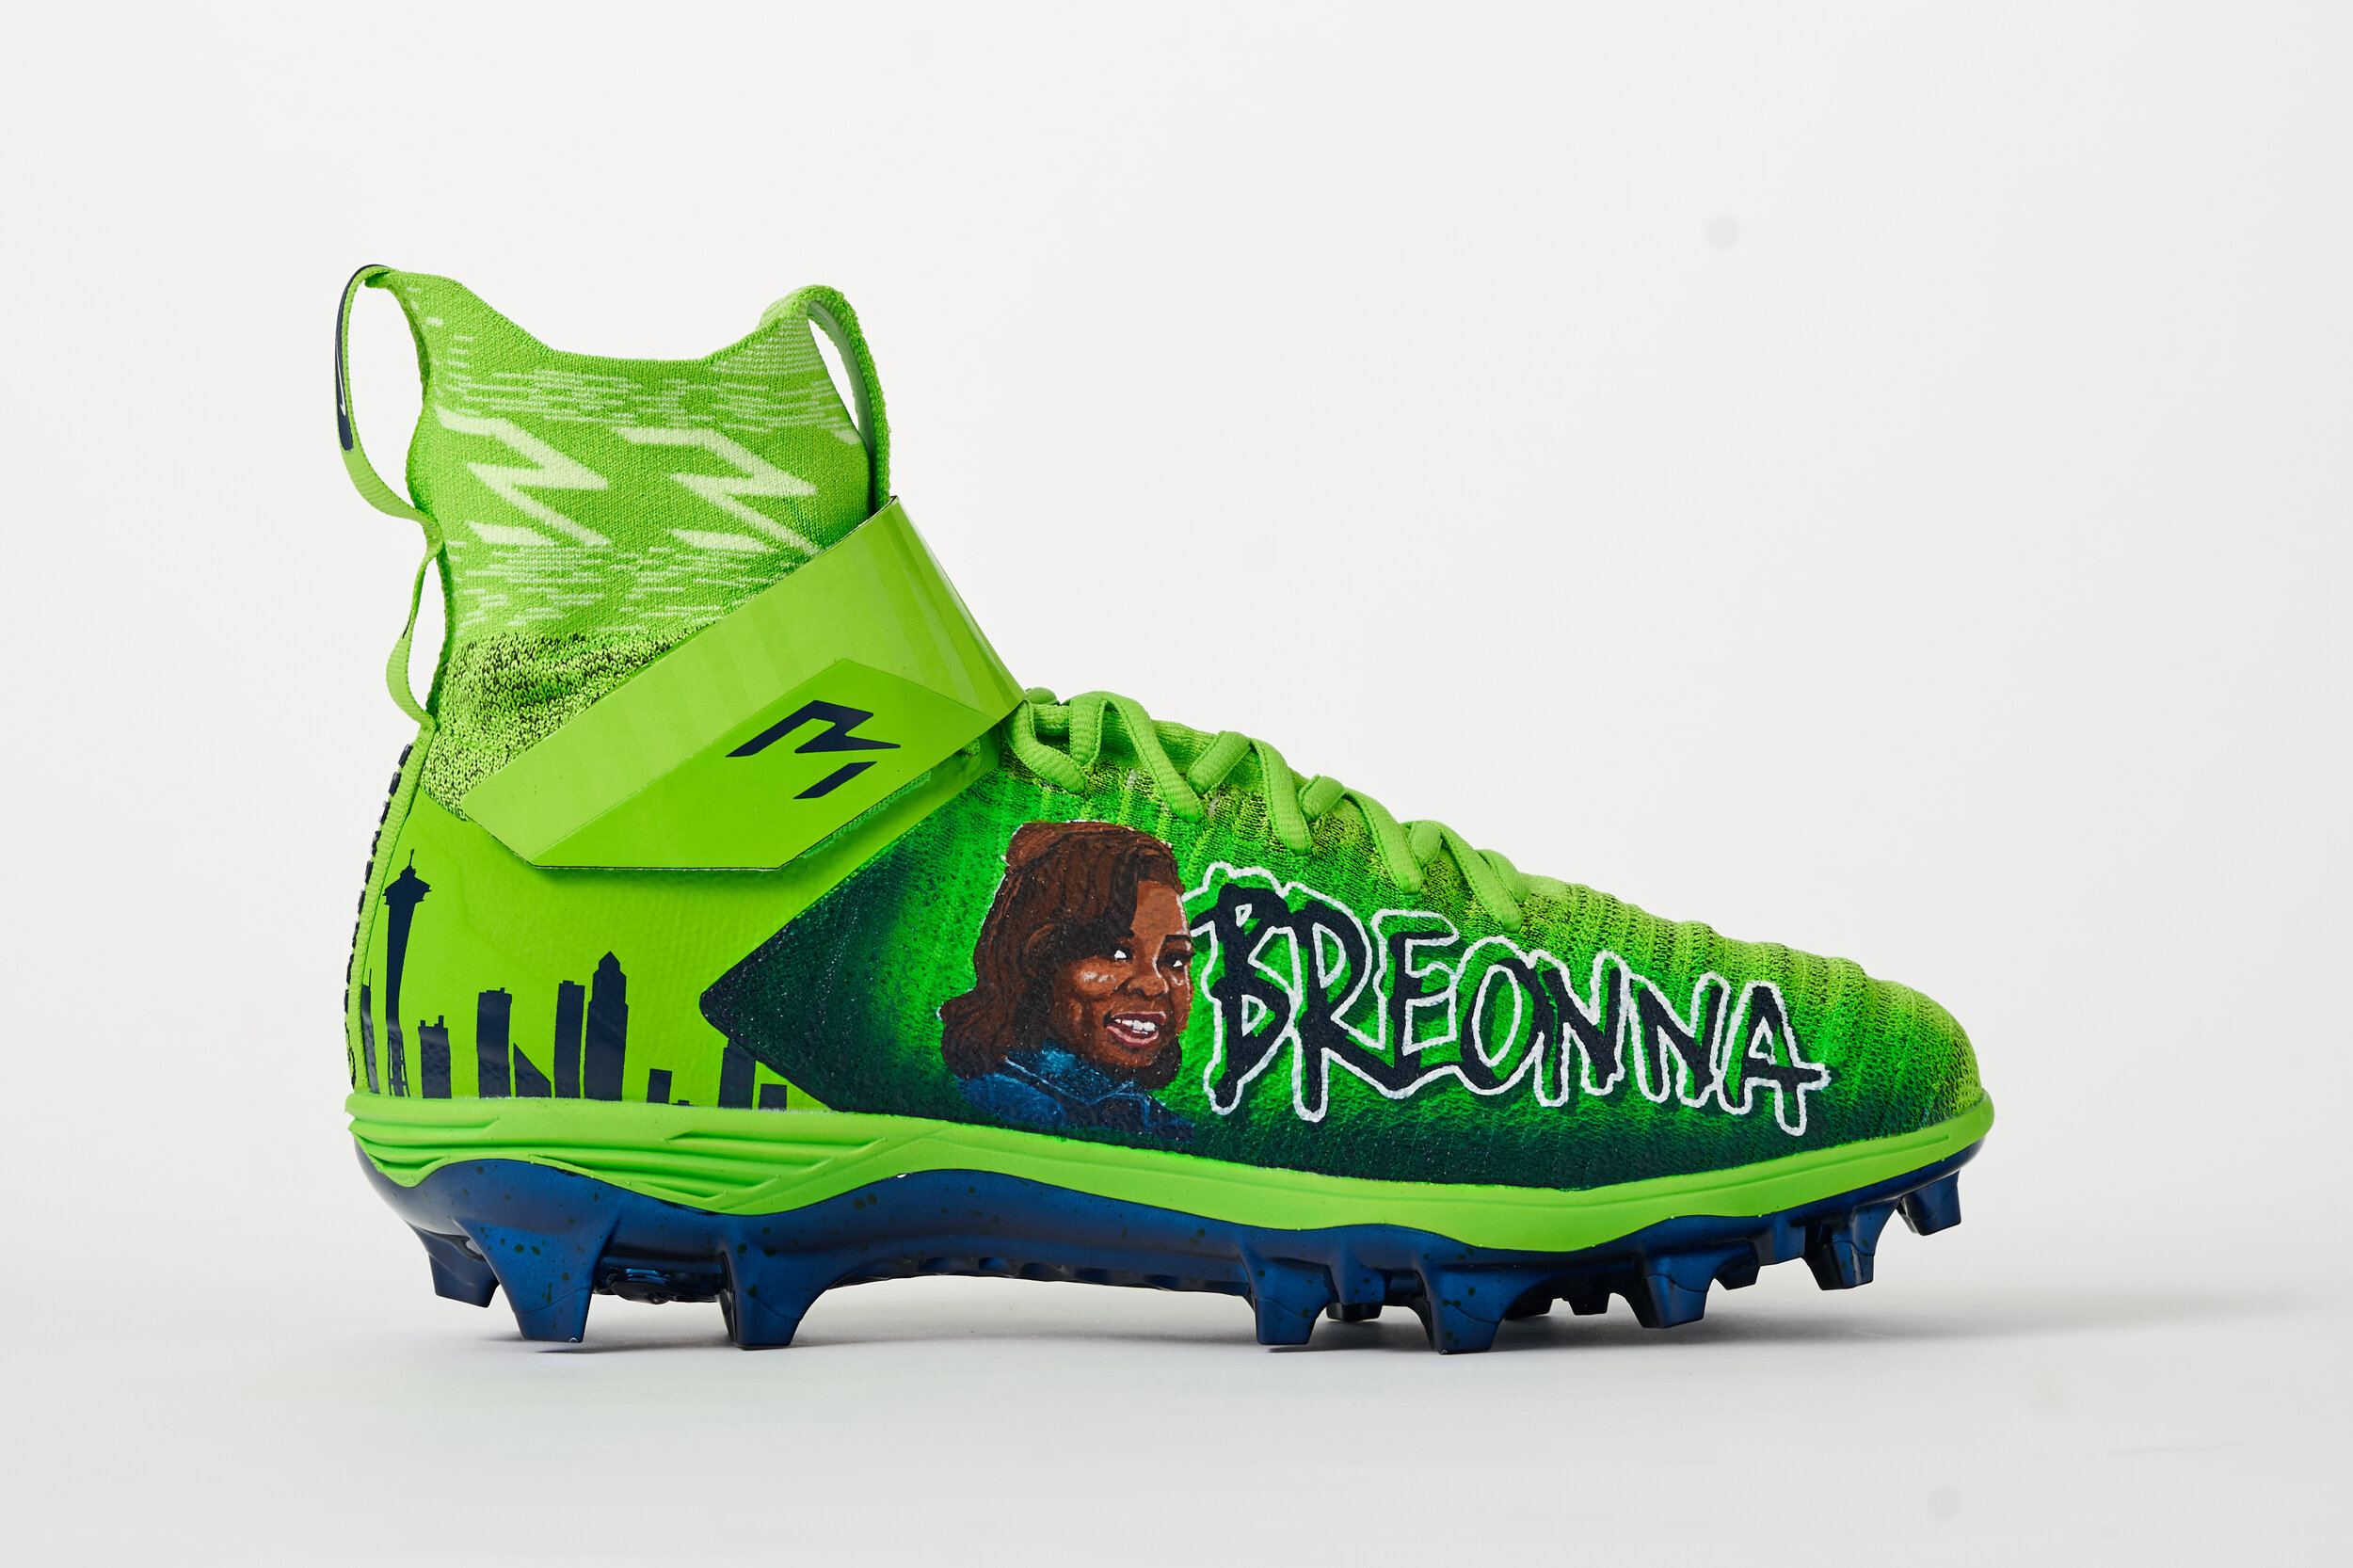 russell wilson cleats nike